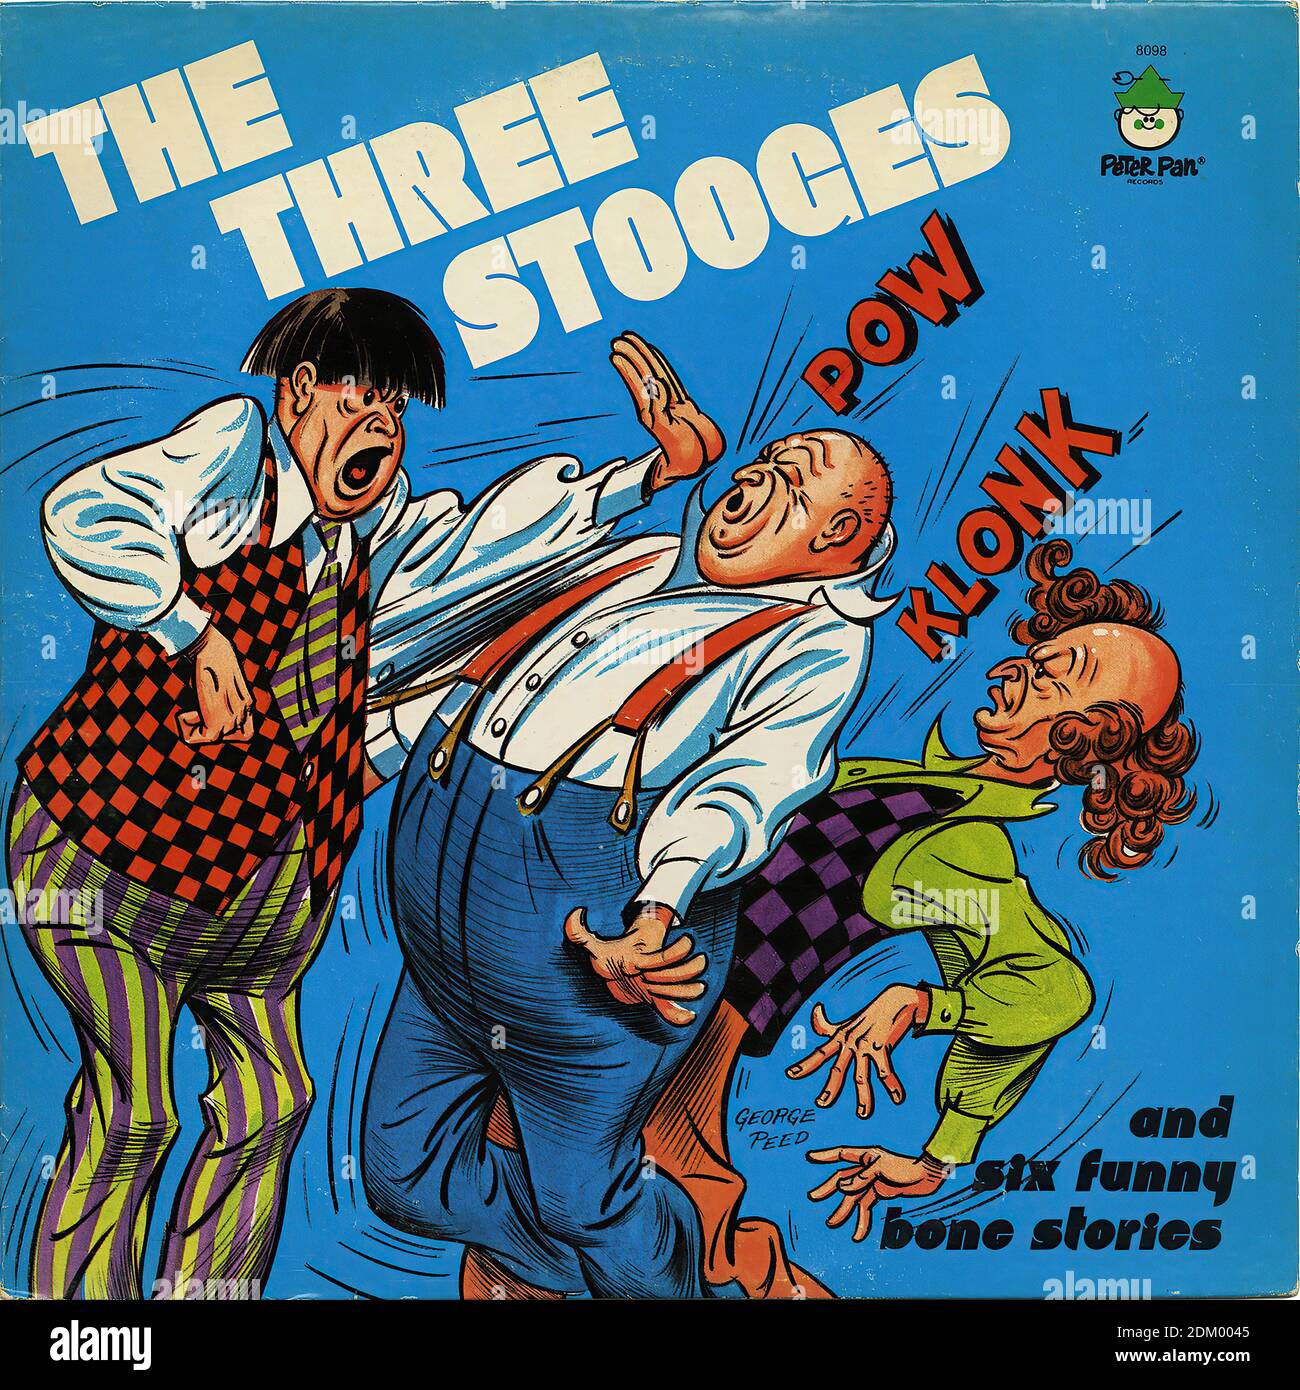 the-three-stooges-and-six-funny-bone-stories-vintage-record-cover